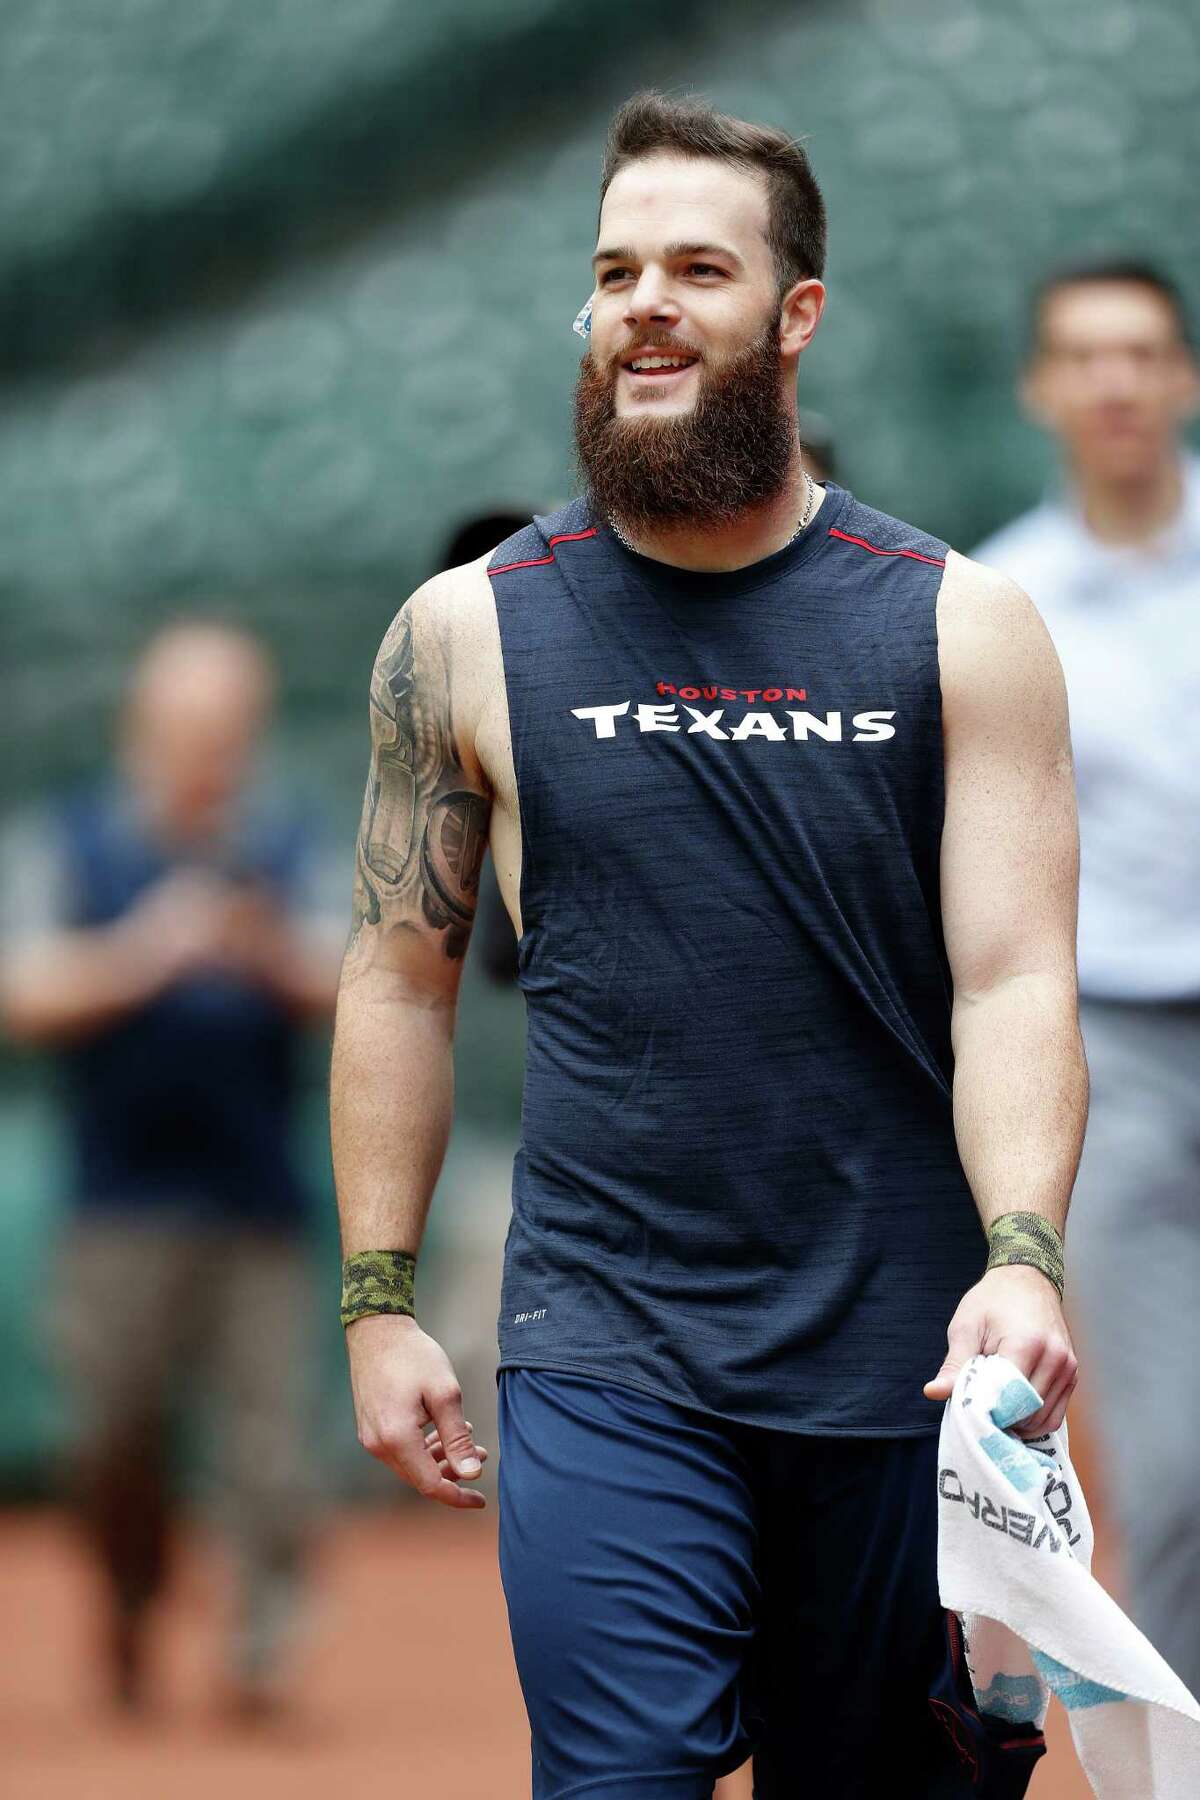 Pitcher Dallas Keuchel walks out to the field as several of the Houston Astros worked out together at Minute Maid Park, Tuesday, January 10, 2017.